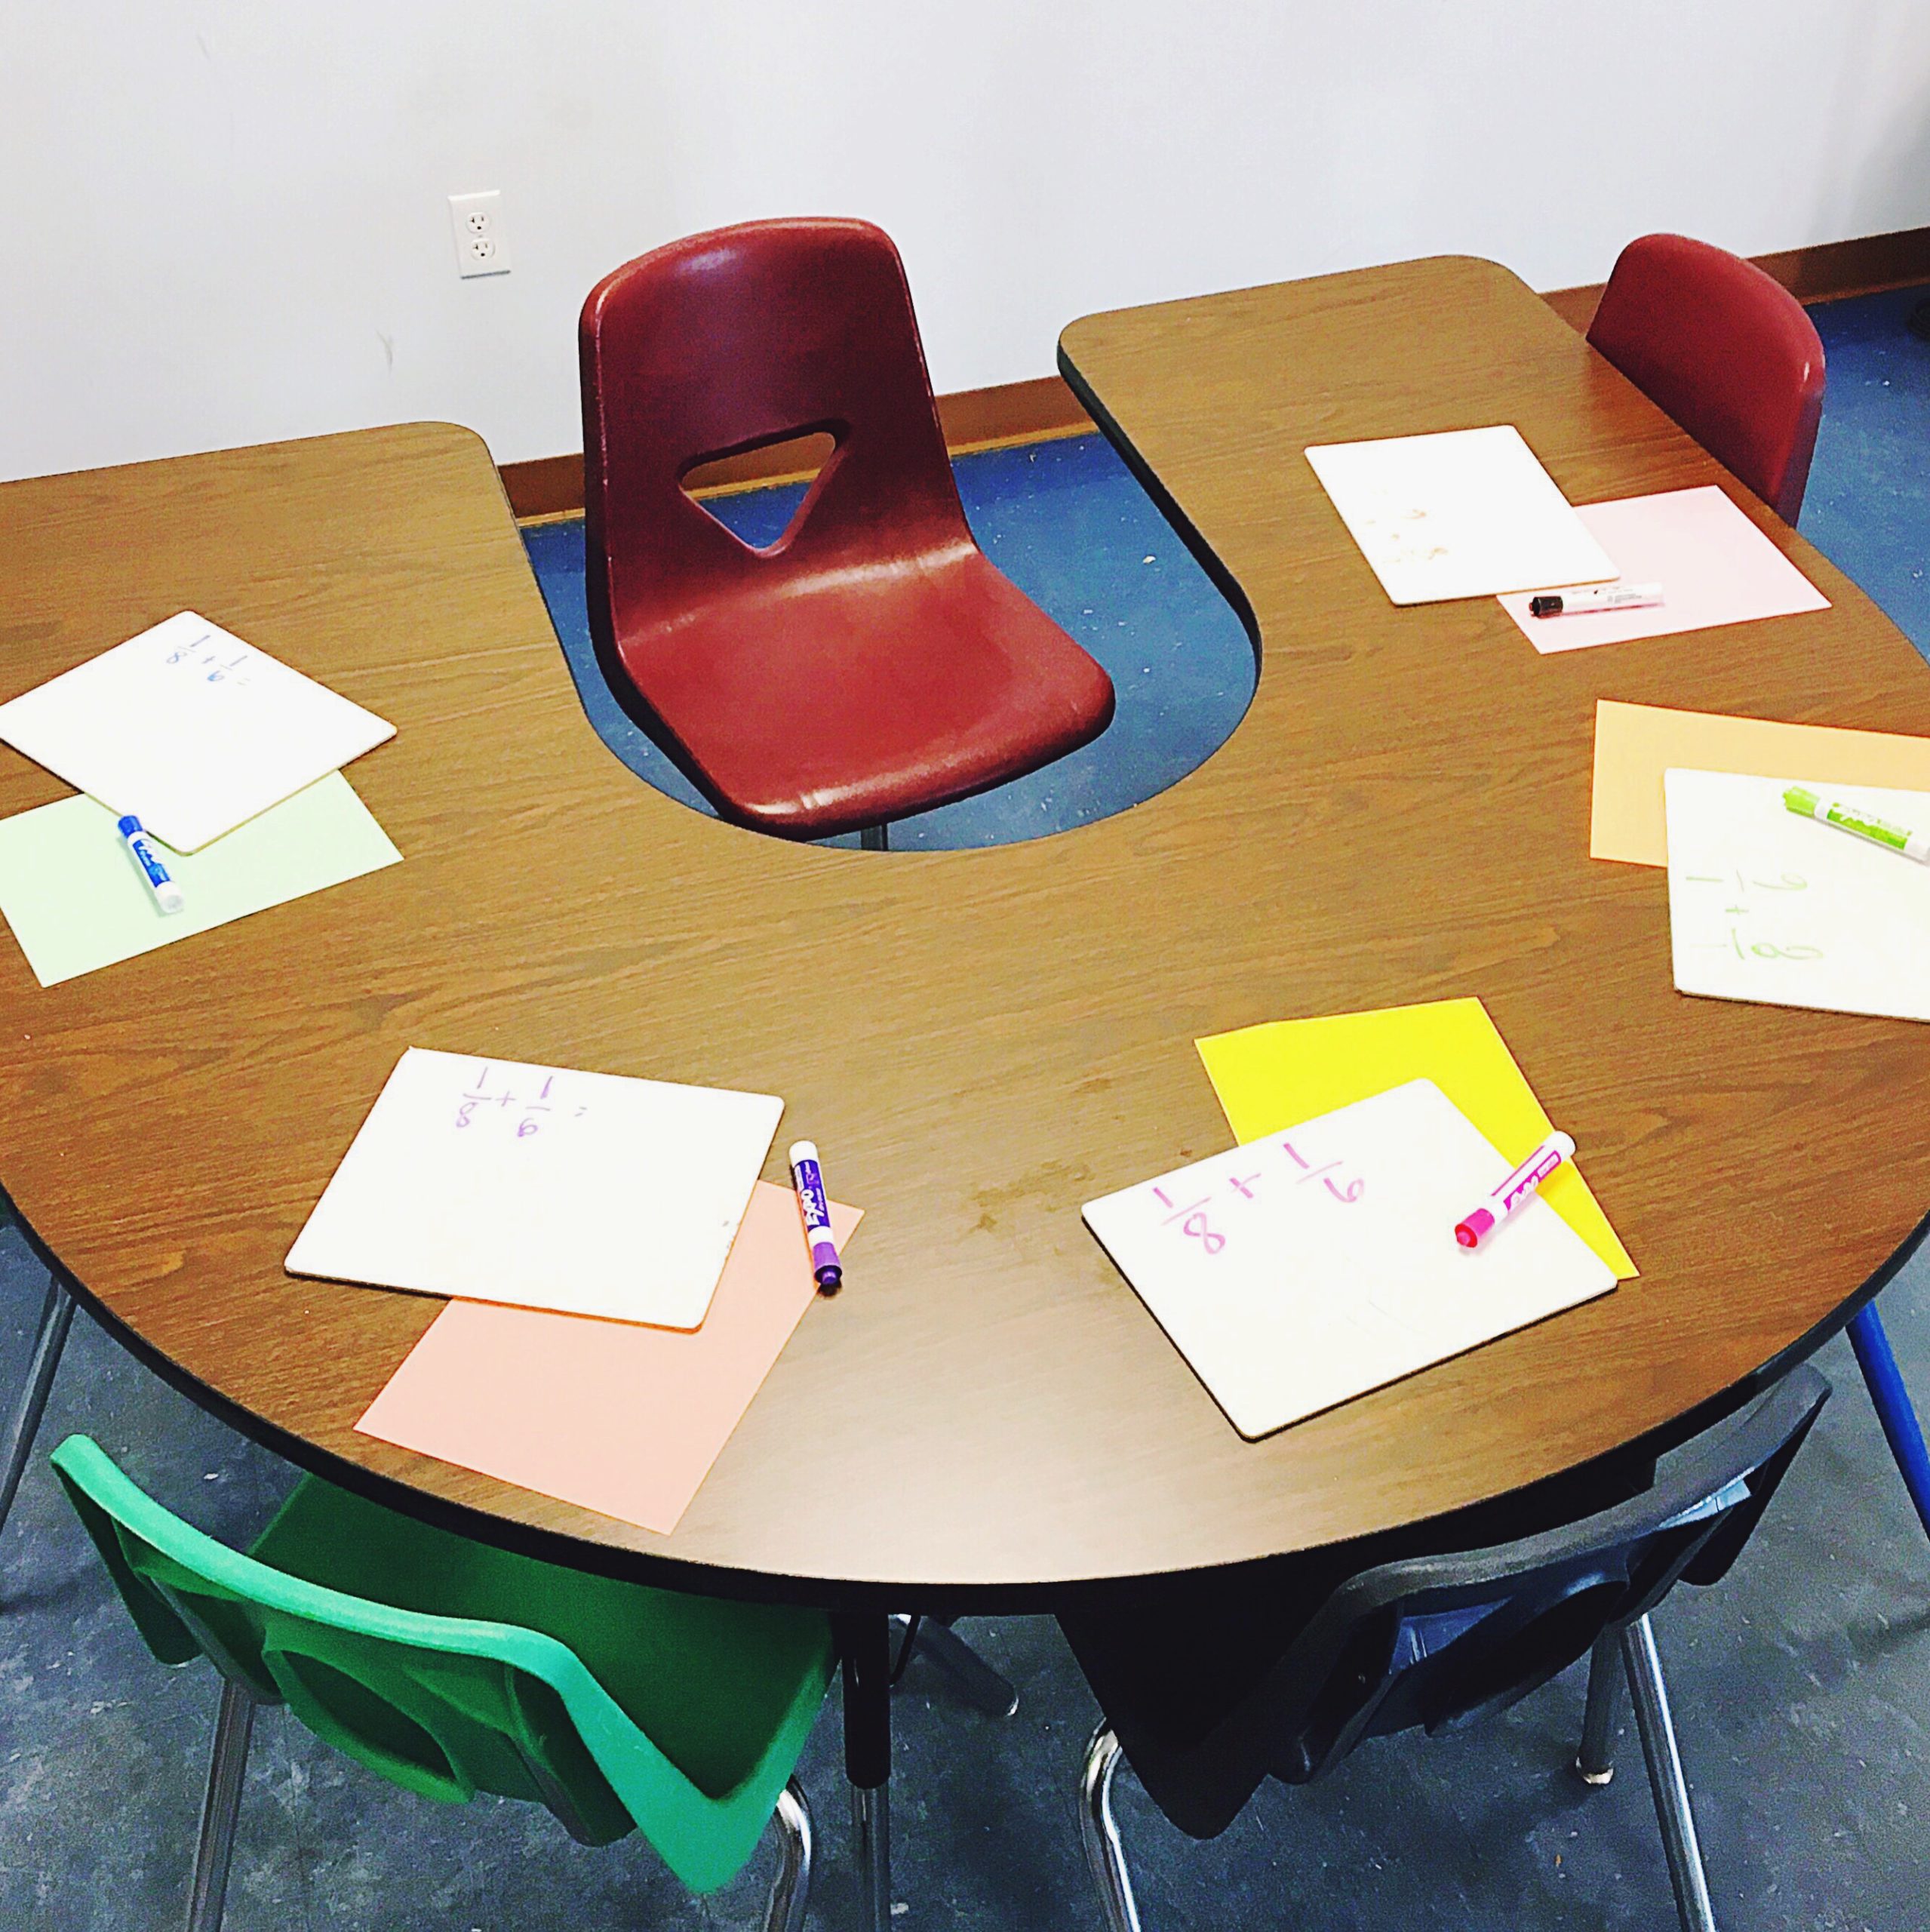 Horseshoe Tables, Group or Teacher directed learning